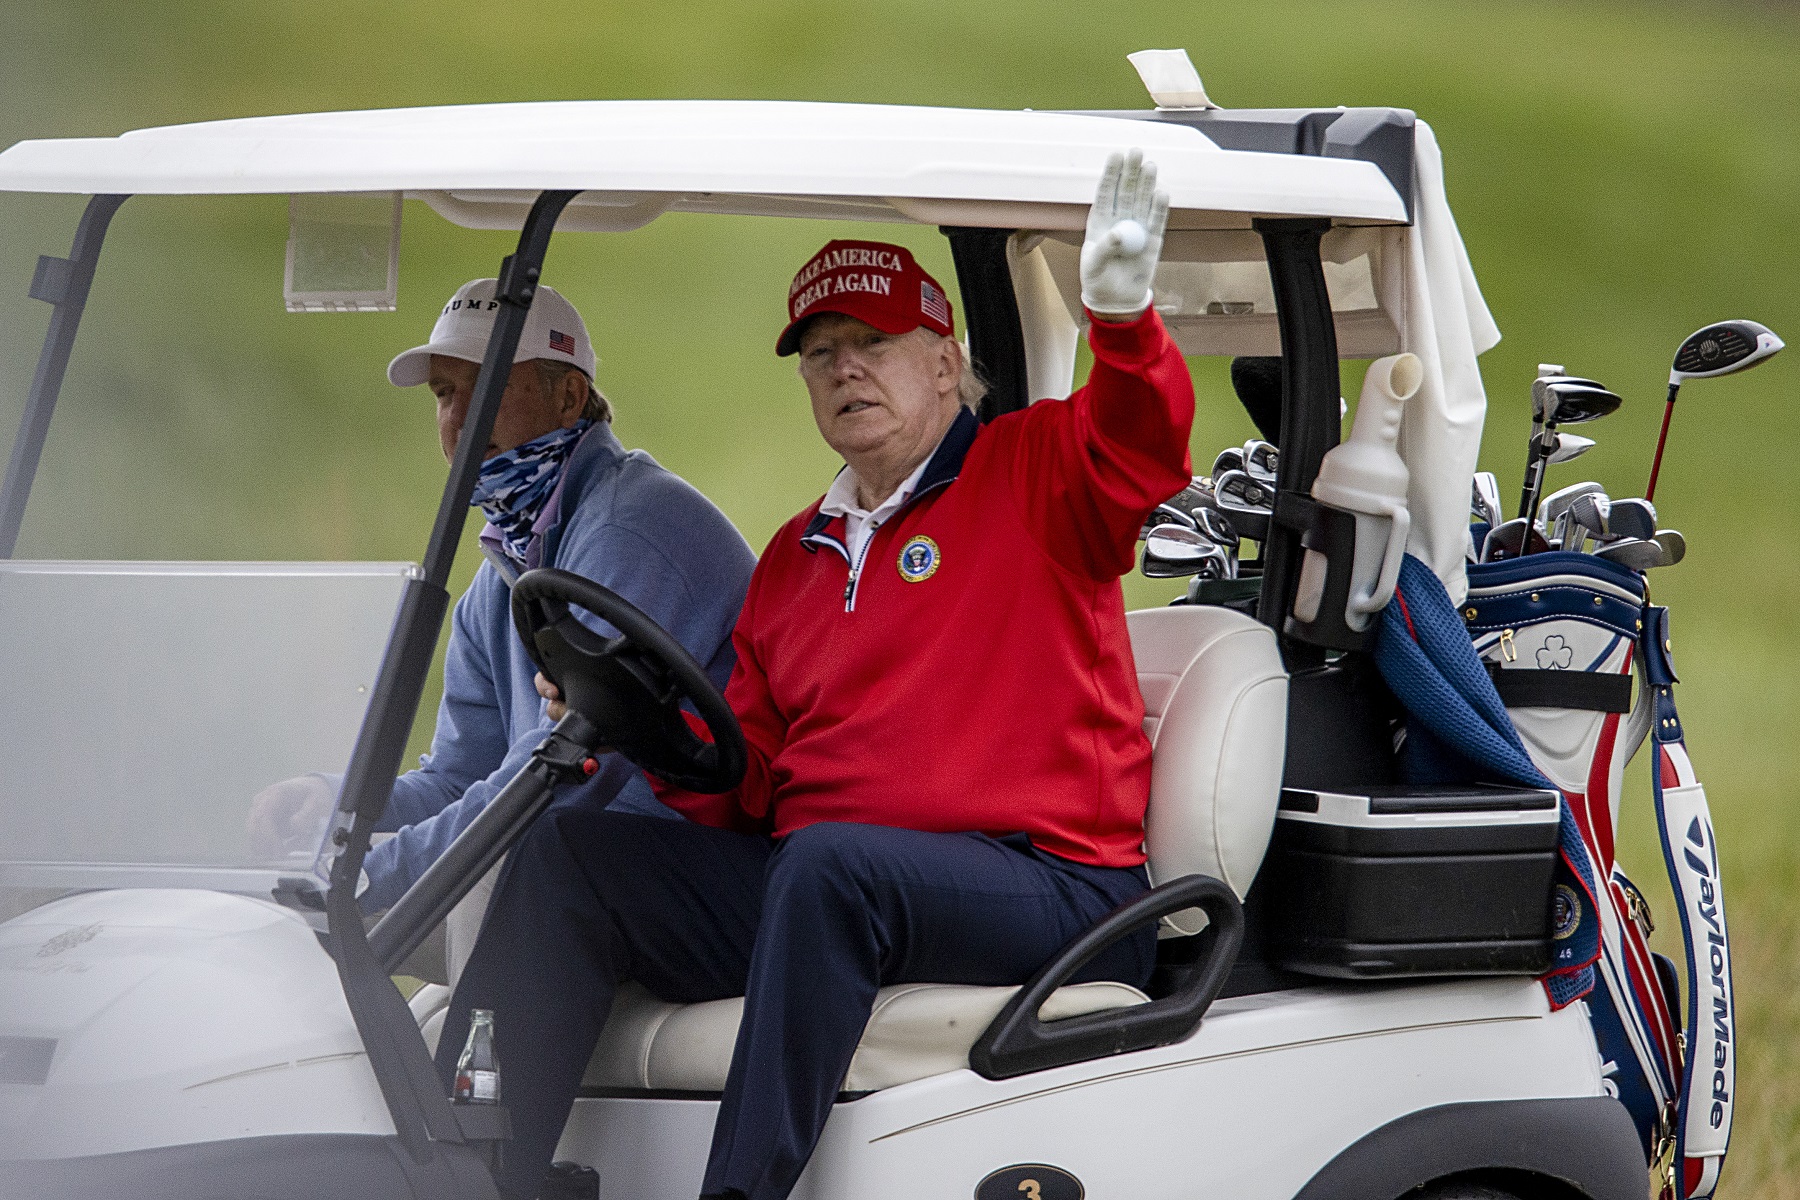 The PGA Championship Has Dumped Donald Trump in a Walter Cronkite Moment